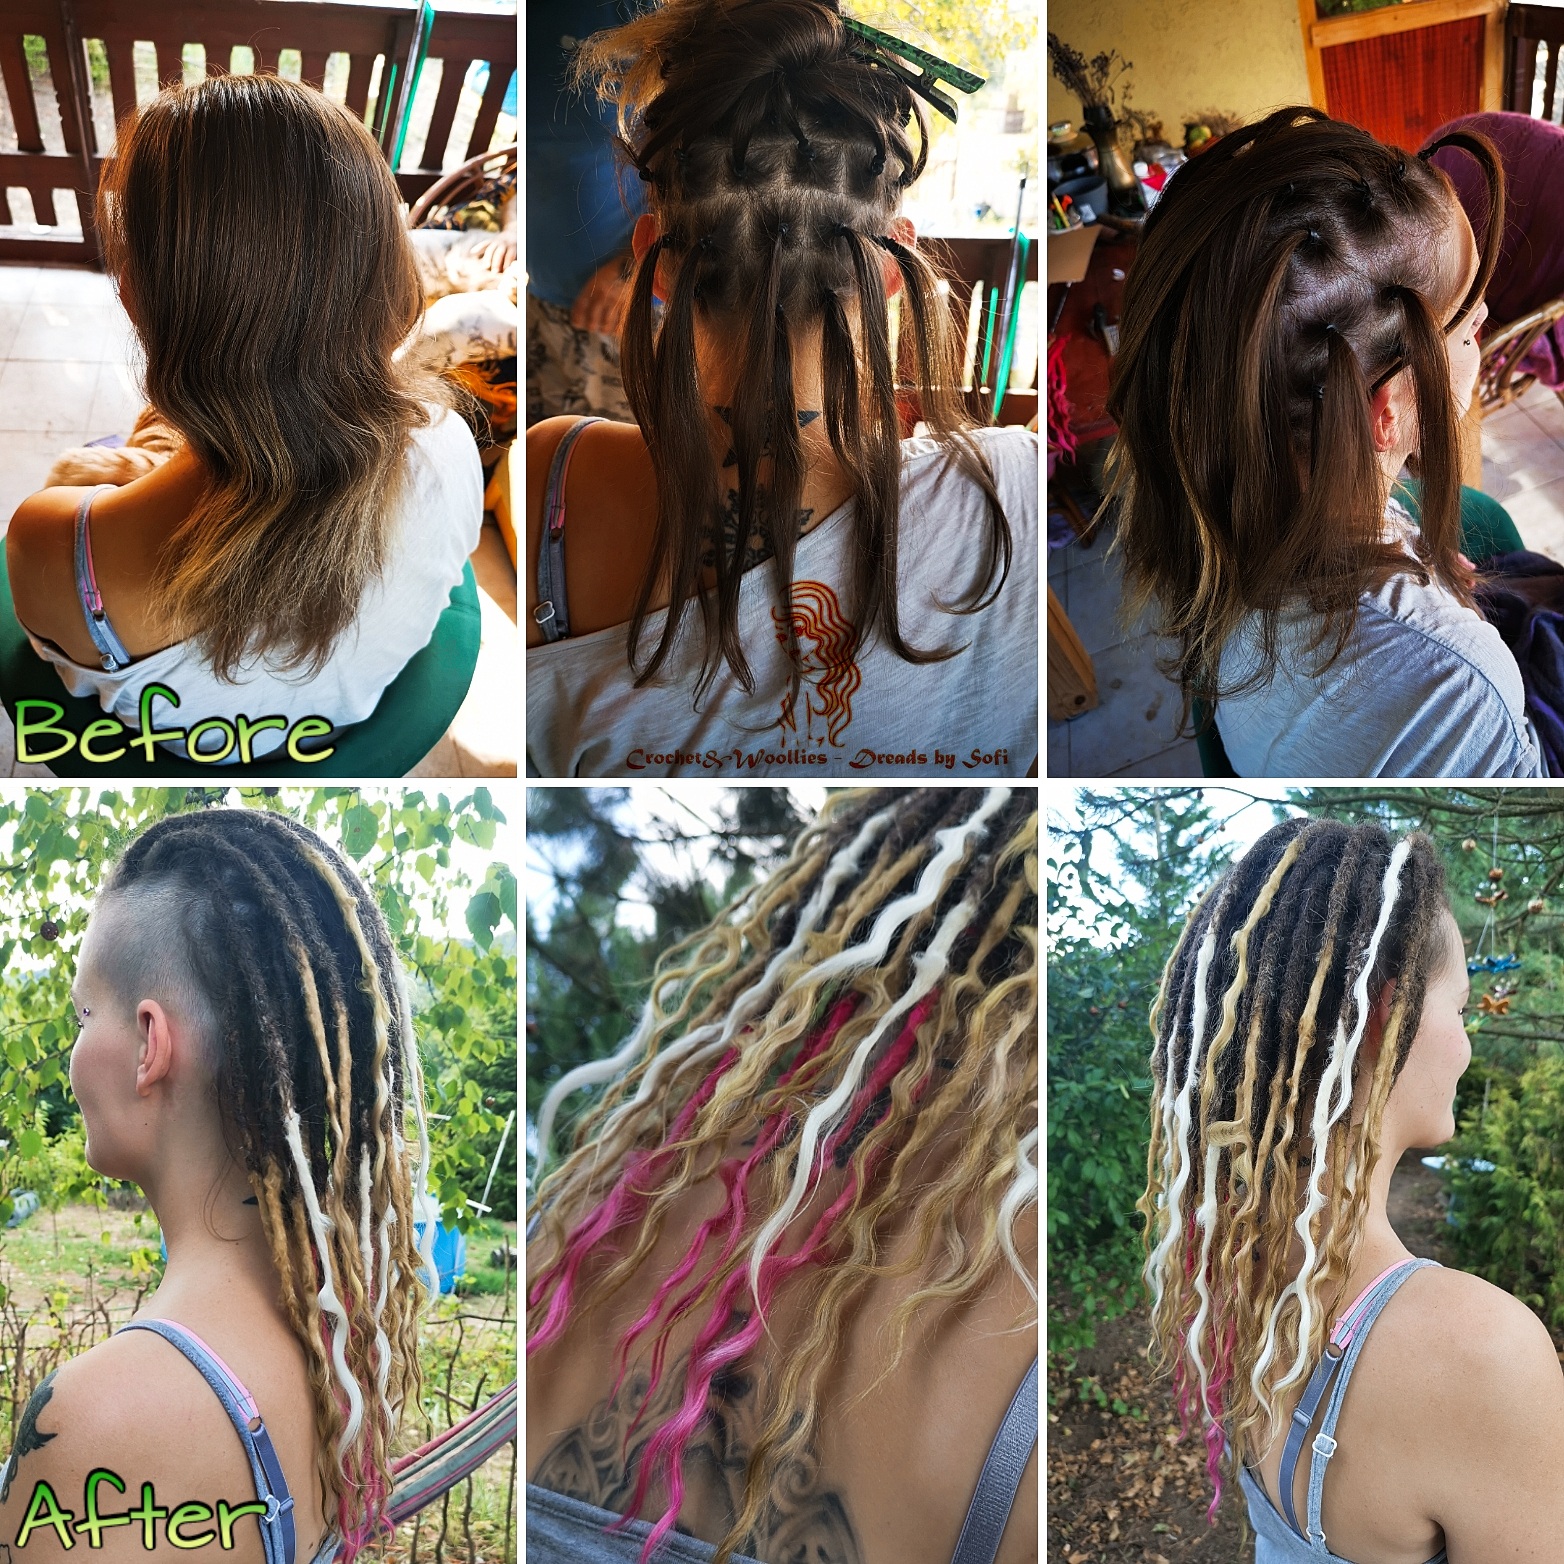 Dreads by Sofi - Real dreads